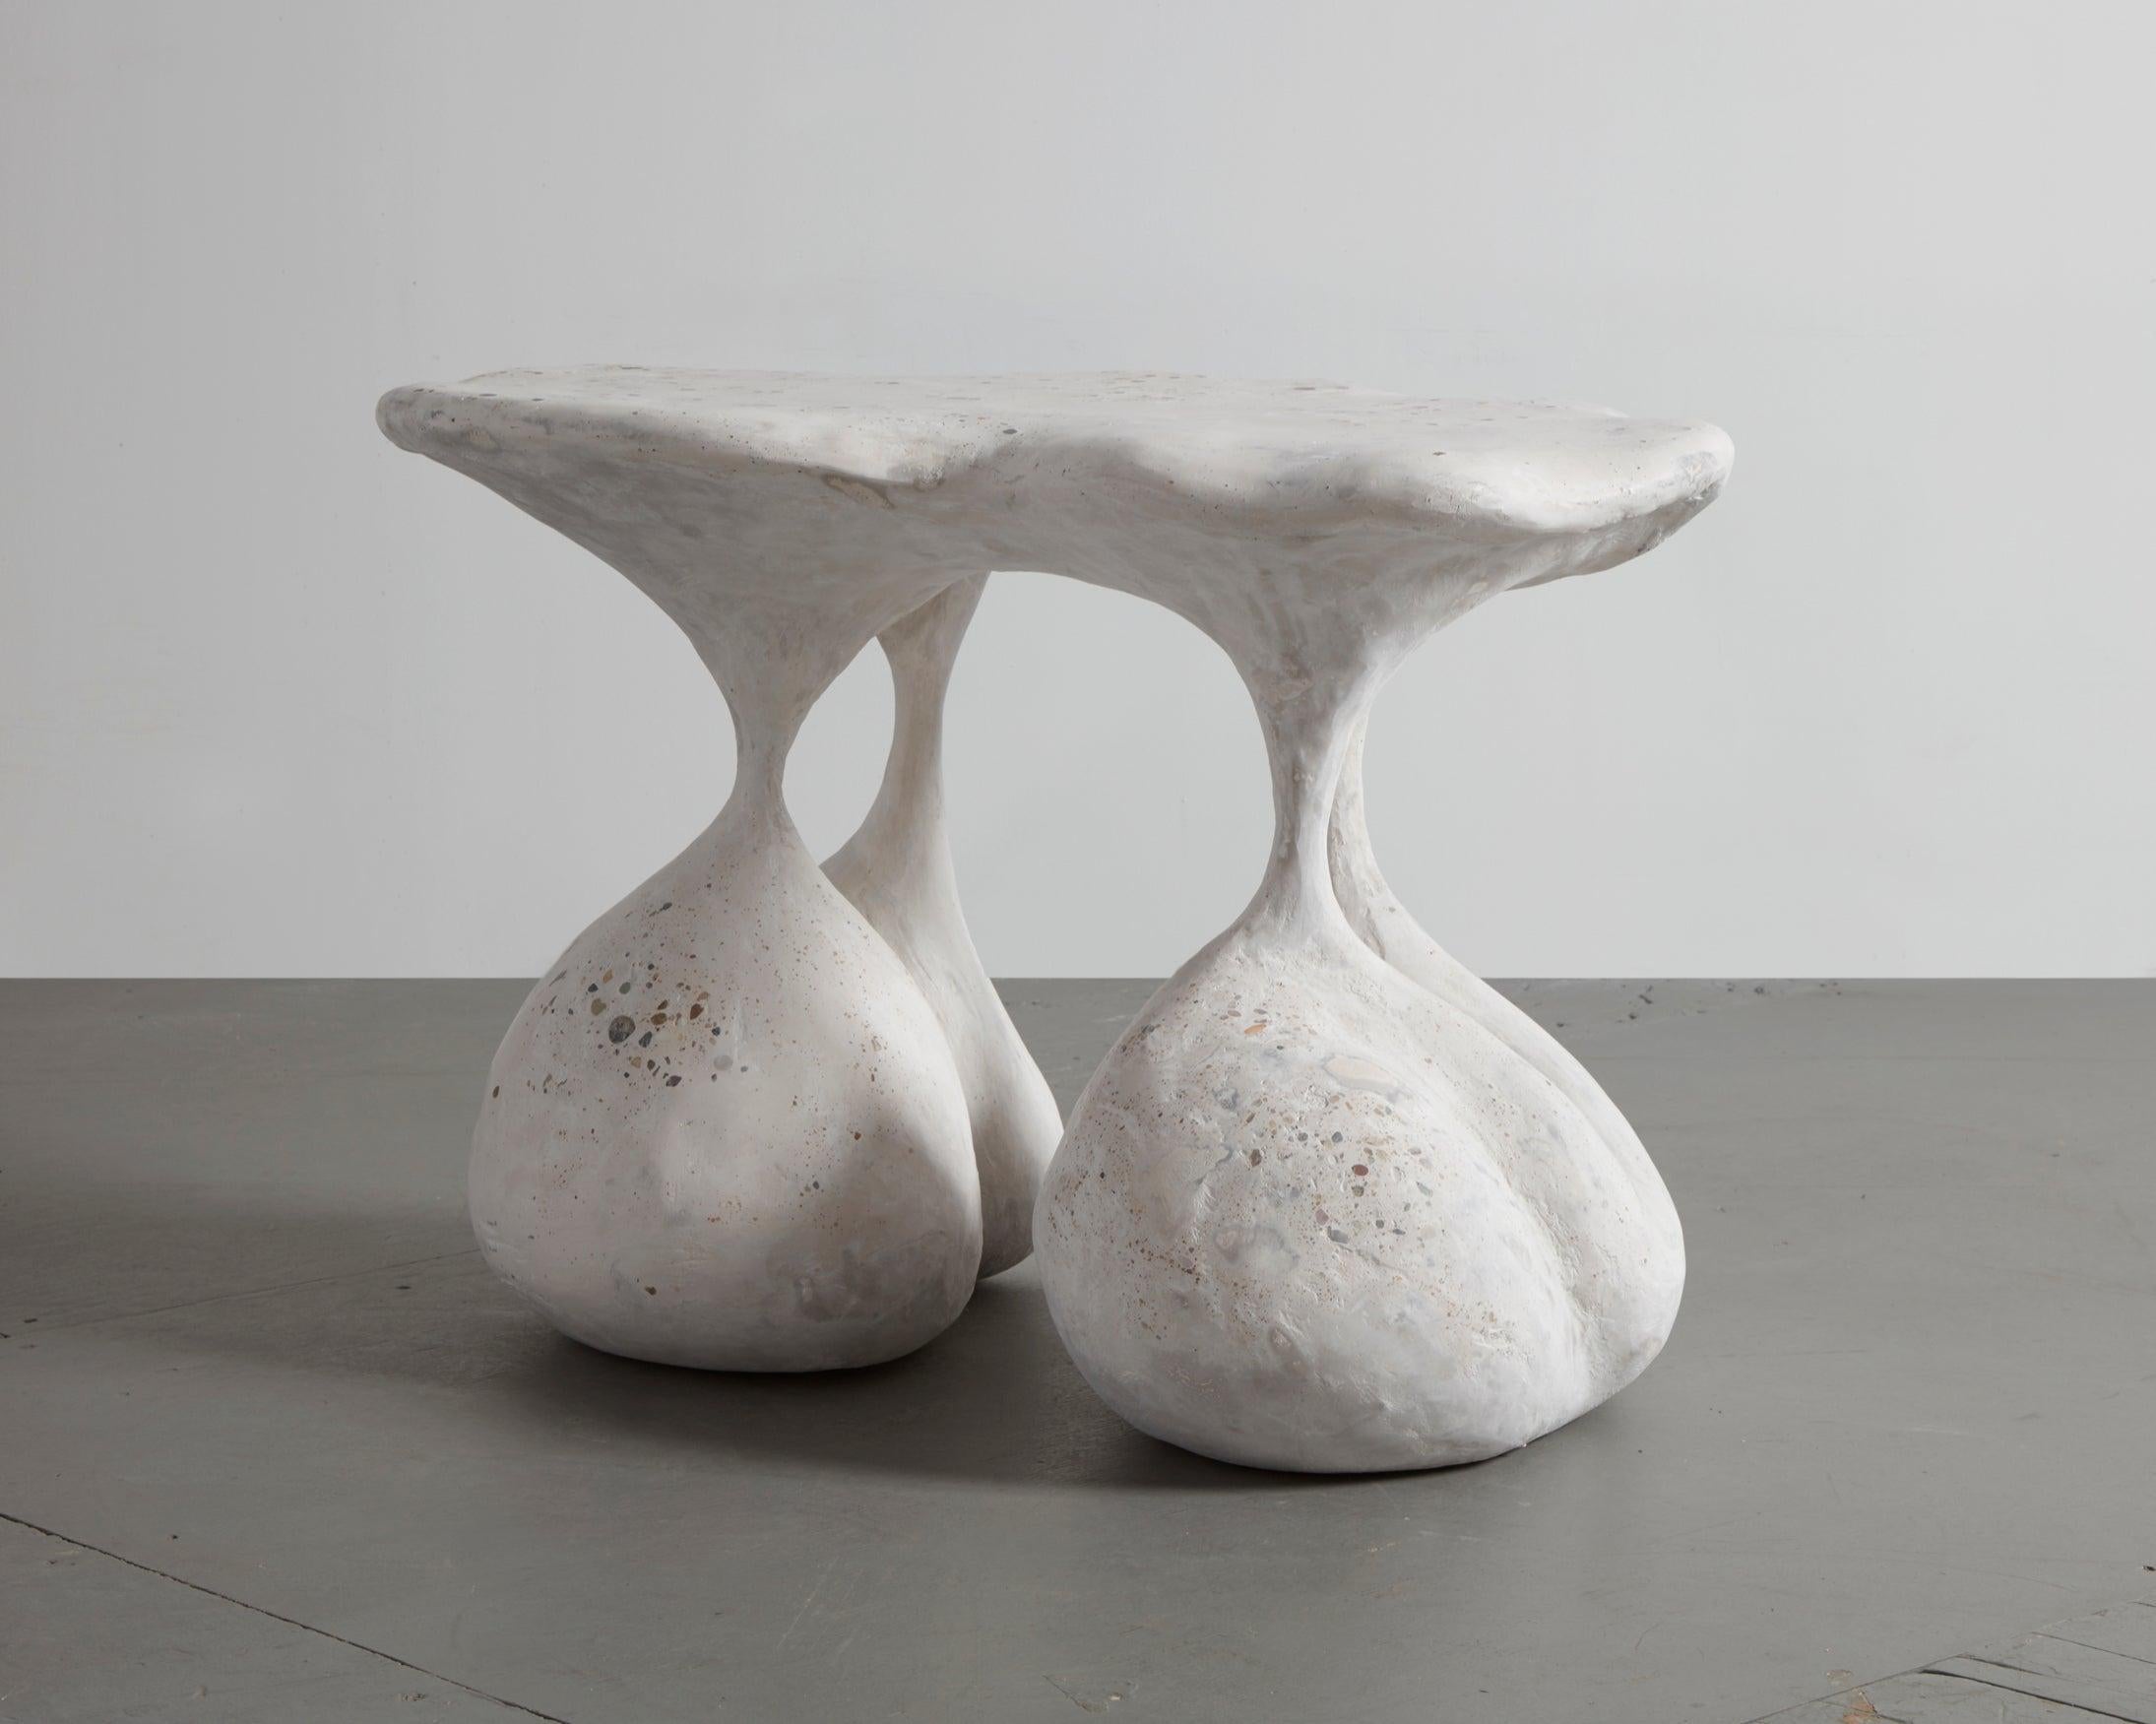 Unique sculptural coffee table in naturally-derived terrazzo. Designed and made by Rogan
Gregory, USA, 2019.